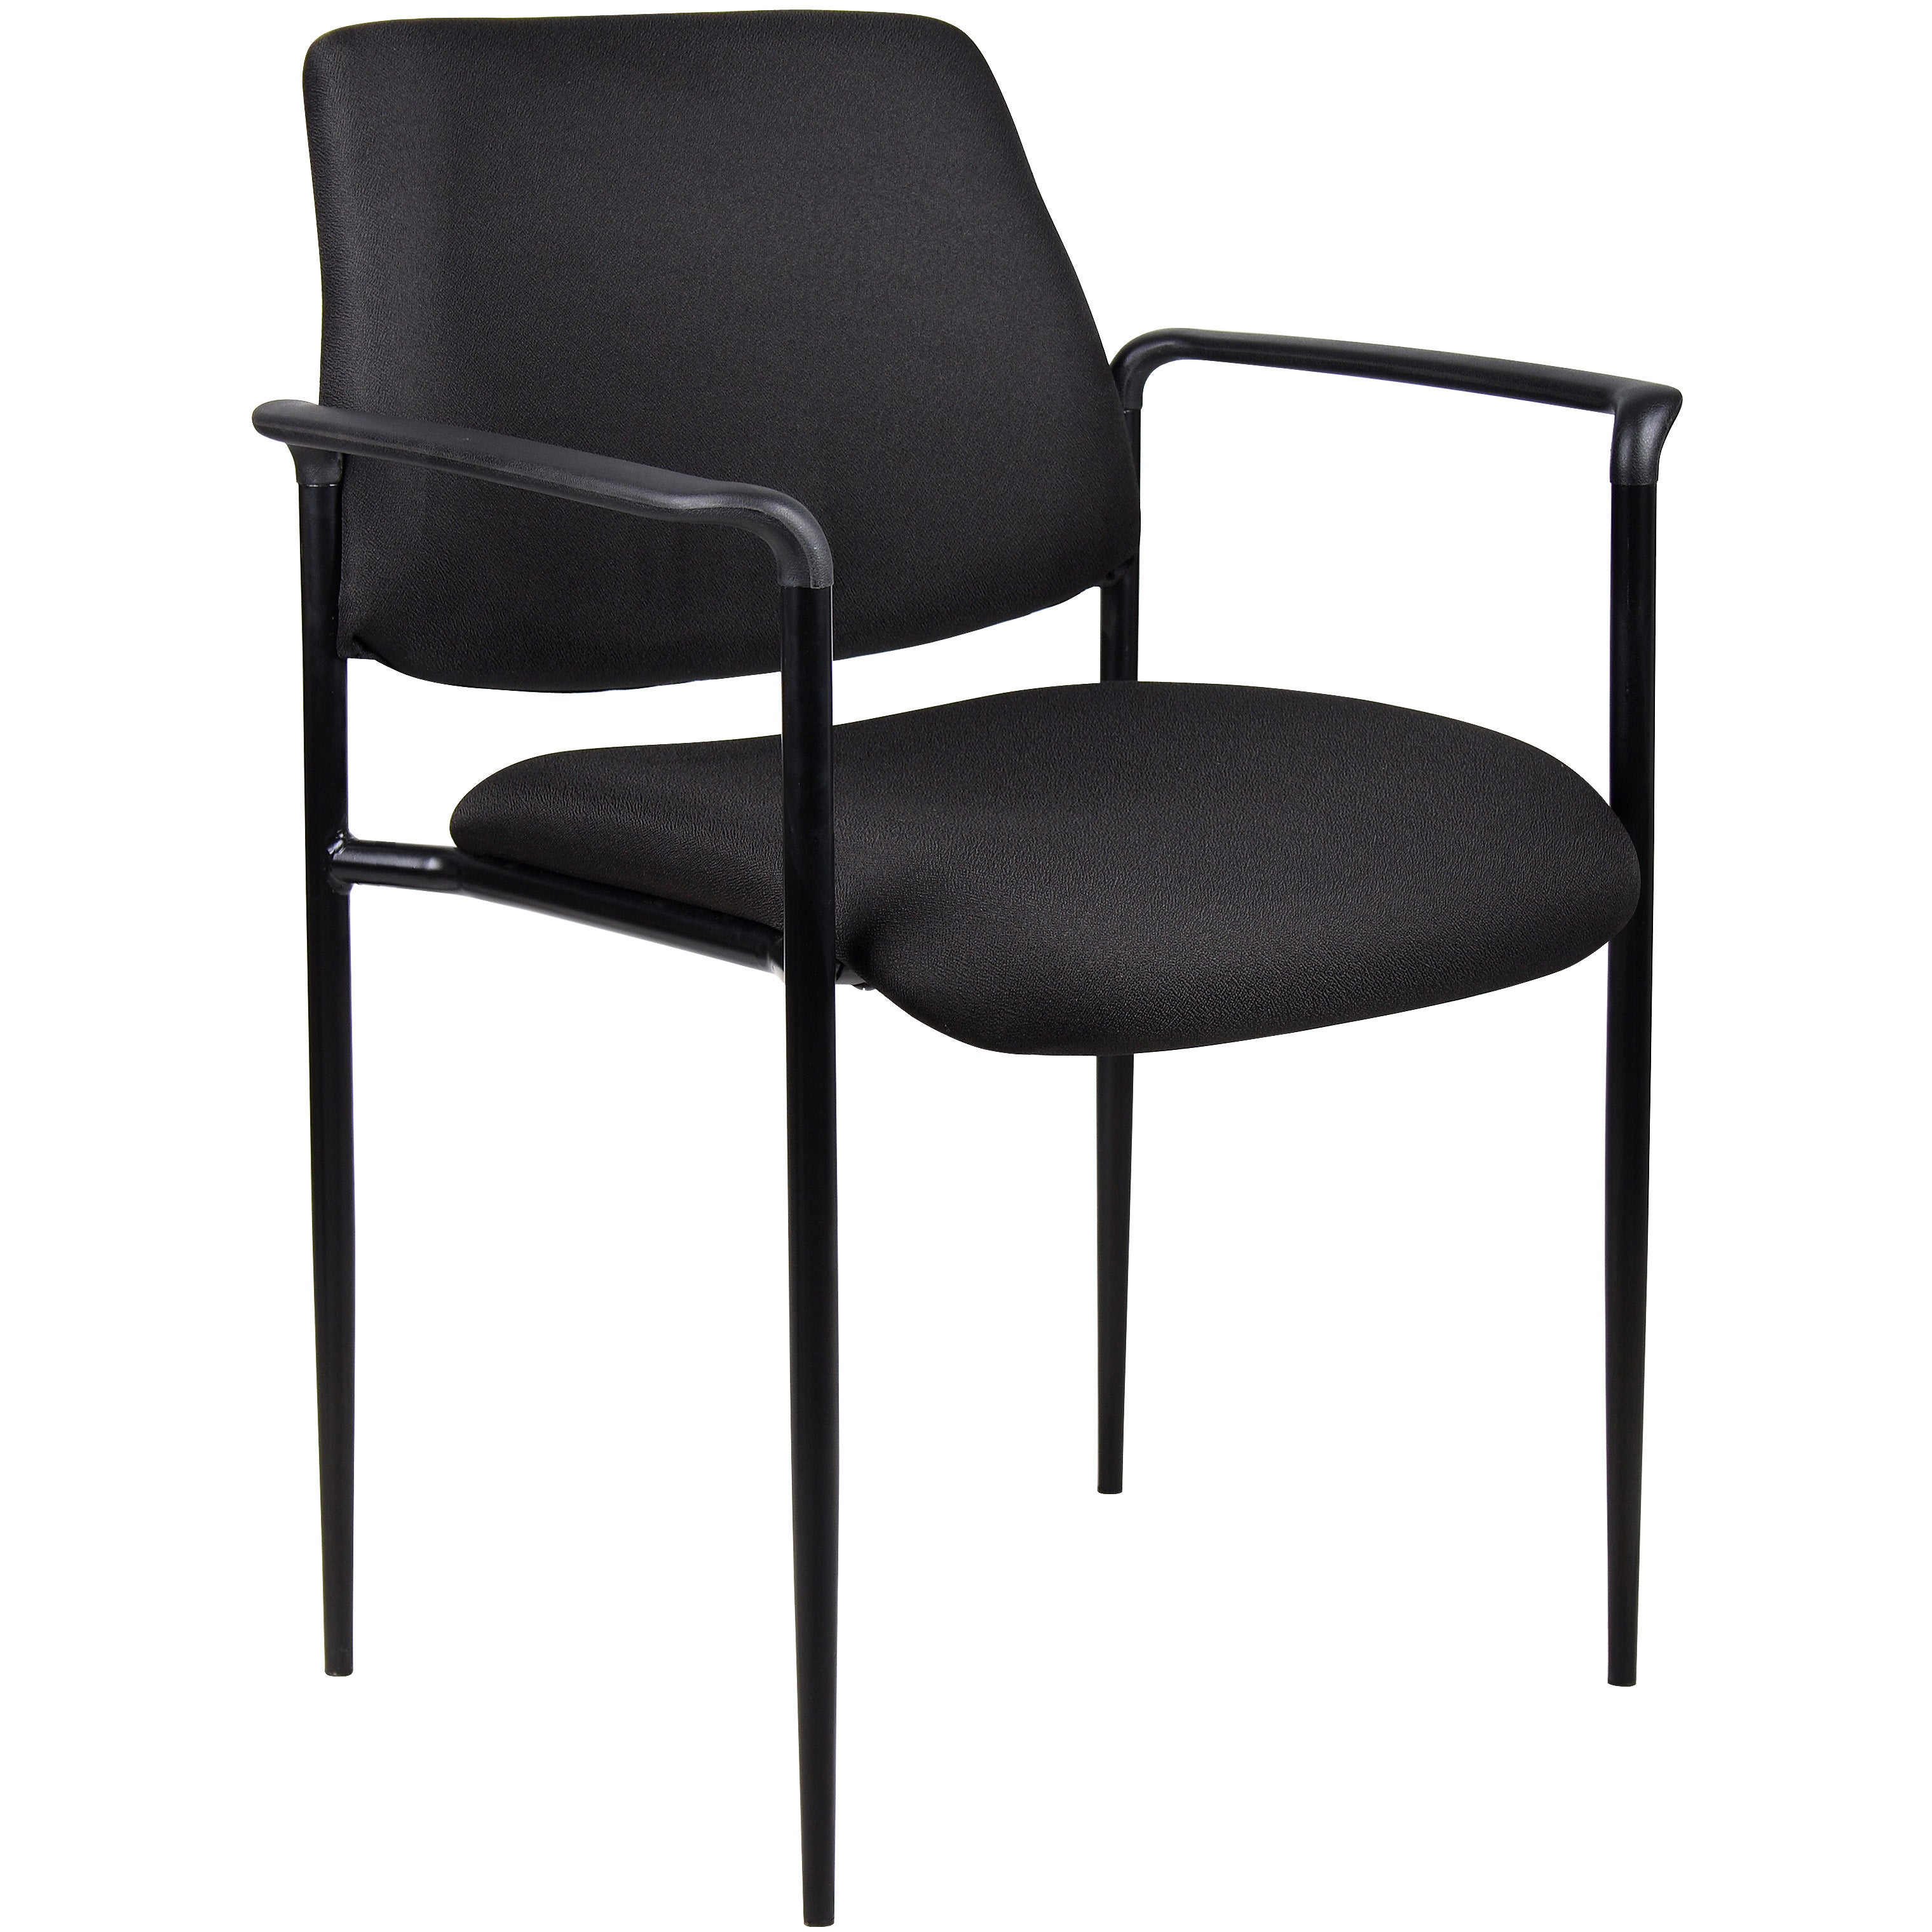 Square Back Diamond Stacking Chair with Arm In Black, B9503-BK